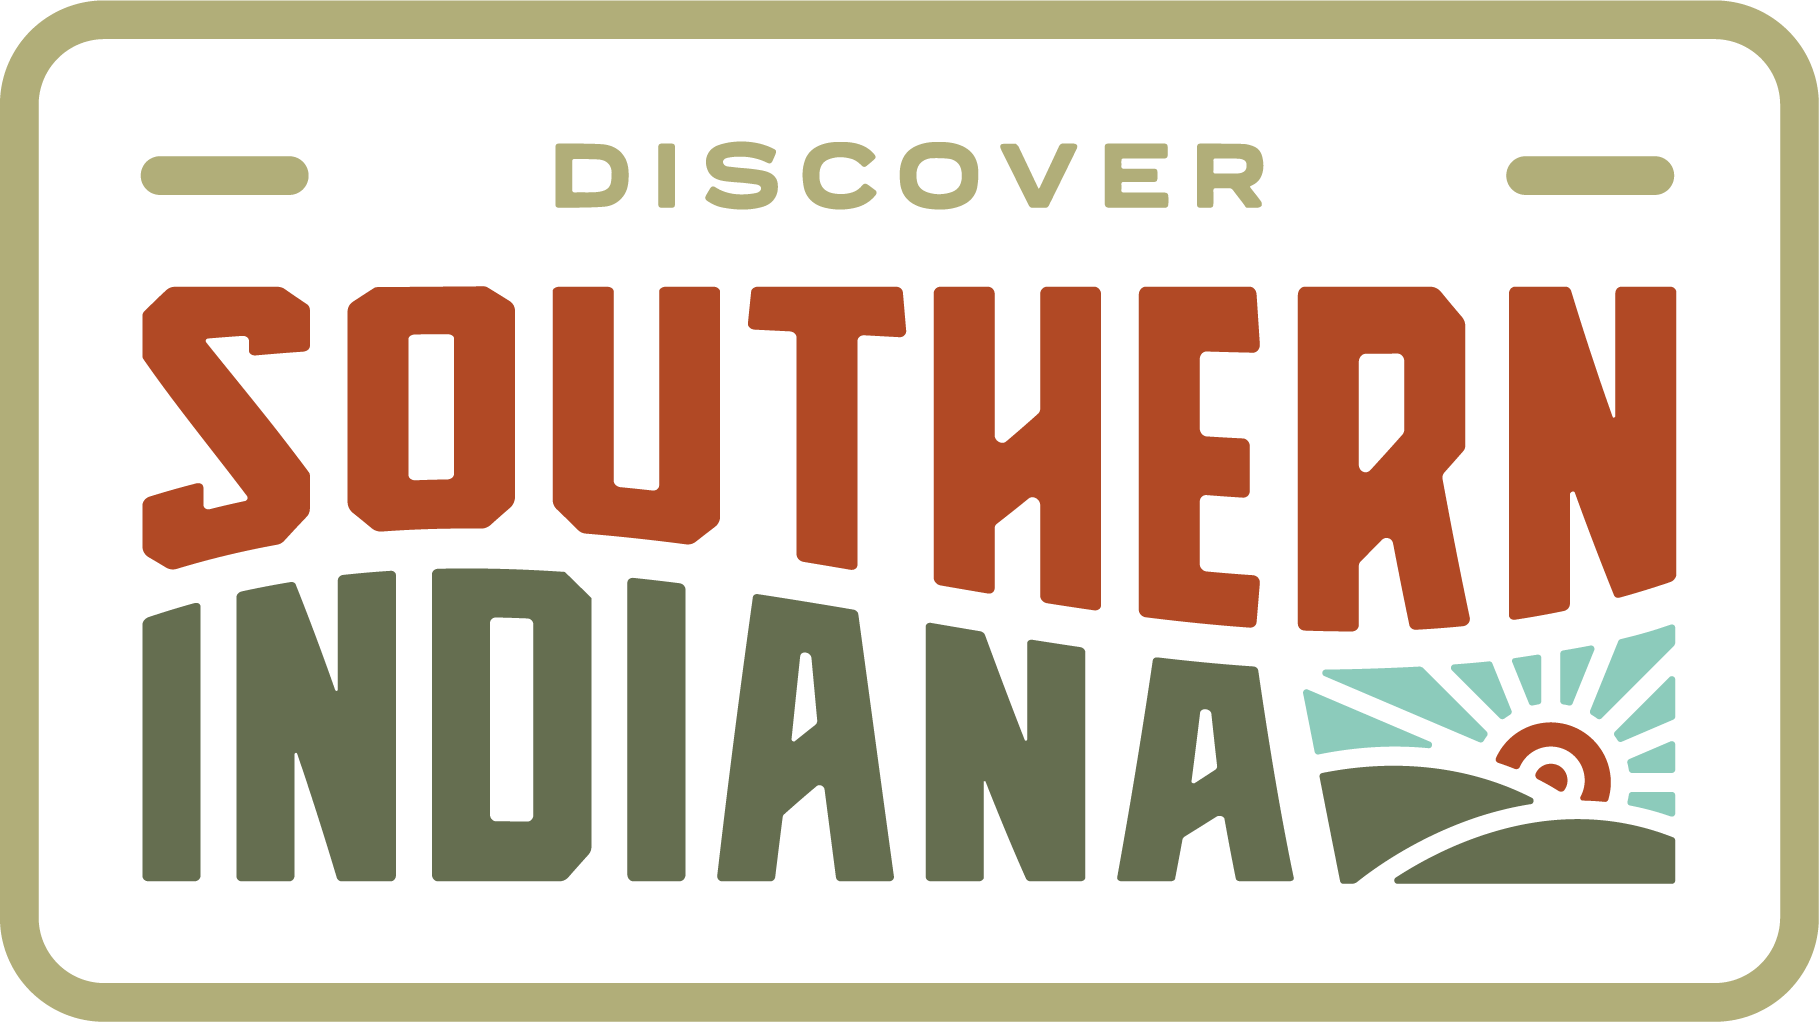 Discover Southern Indiana launches new branding Radius Indiana